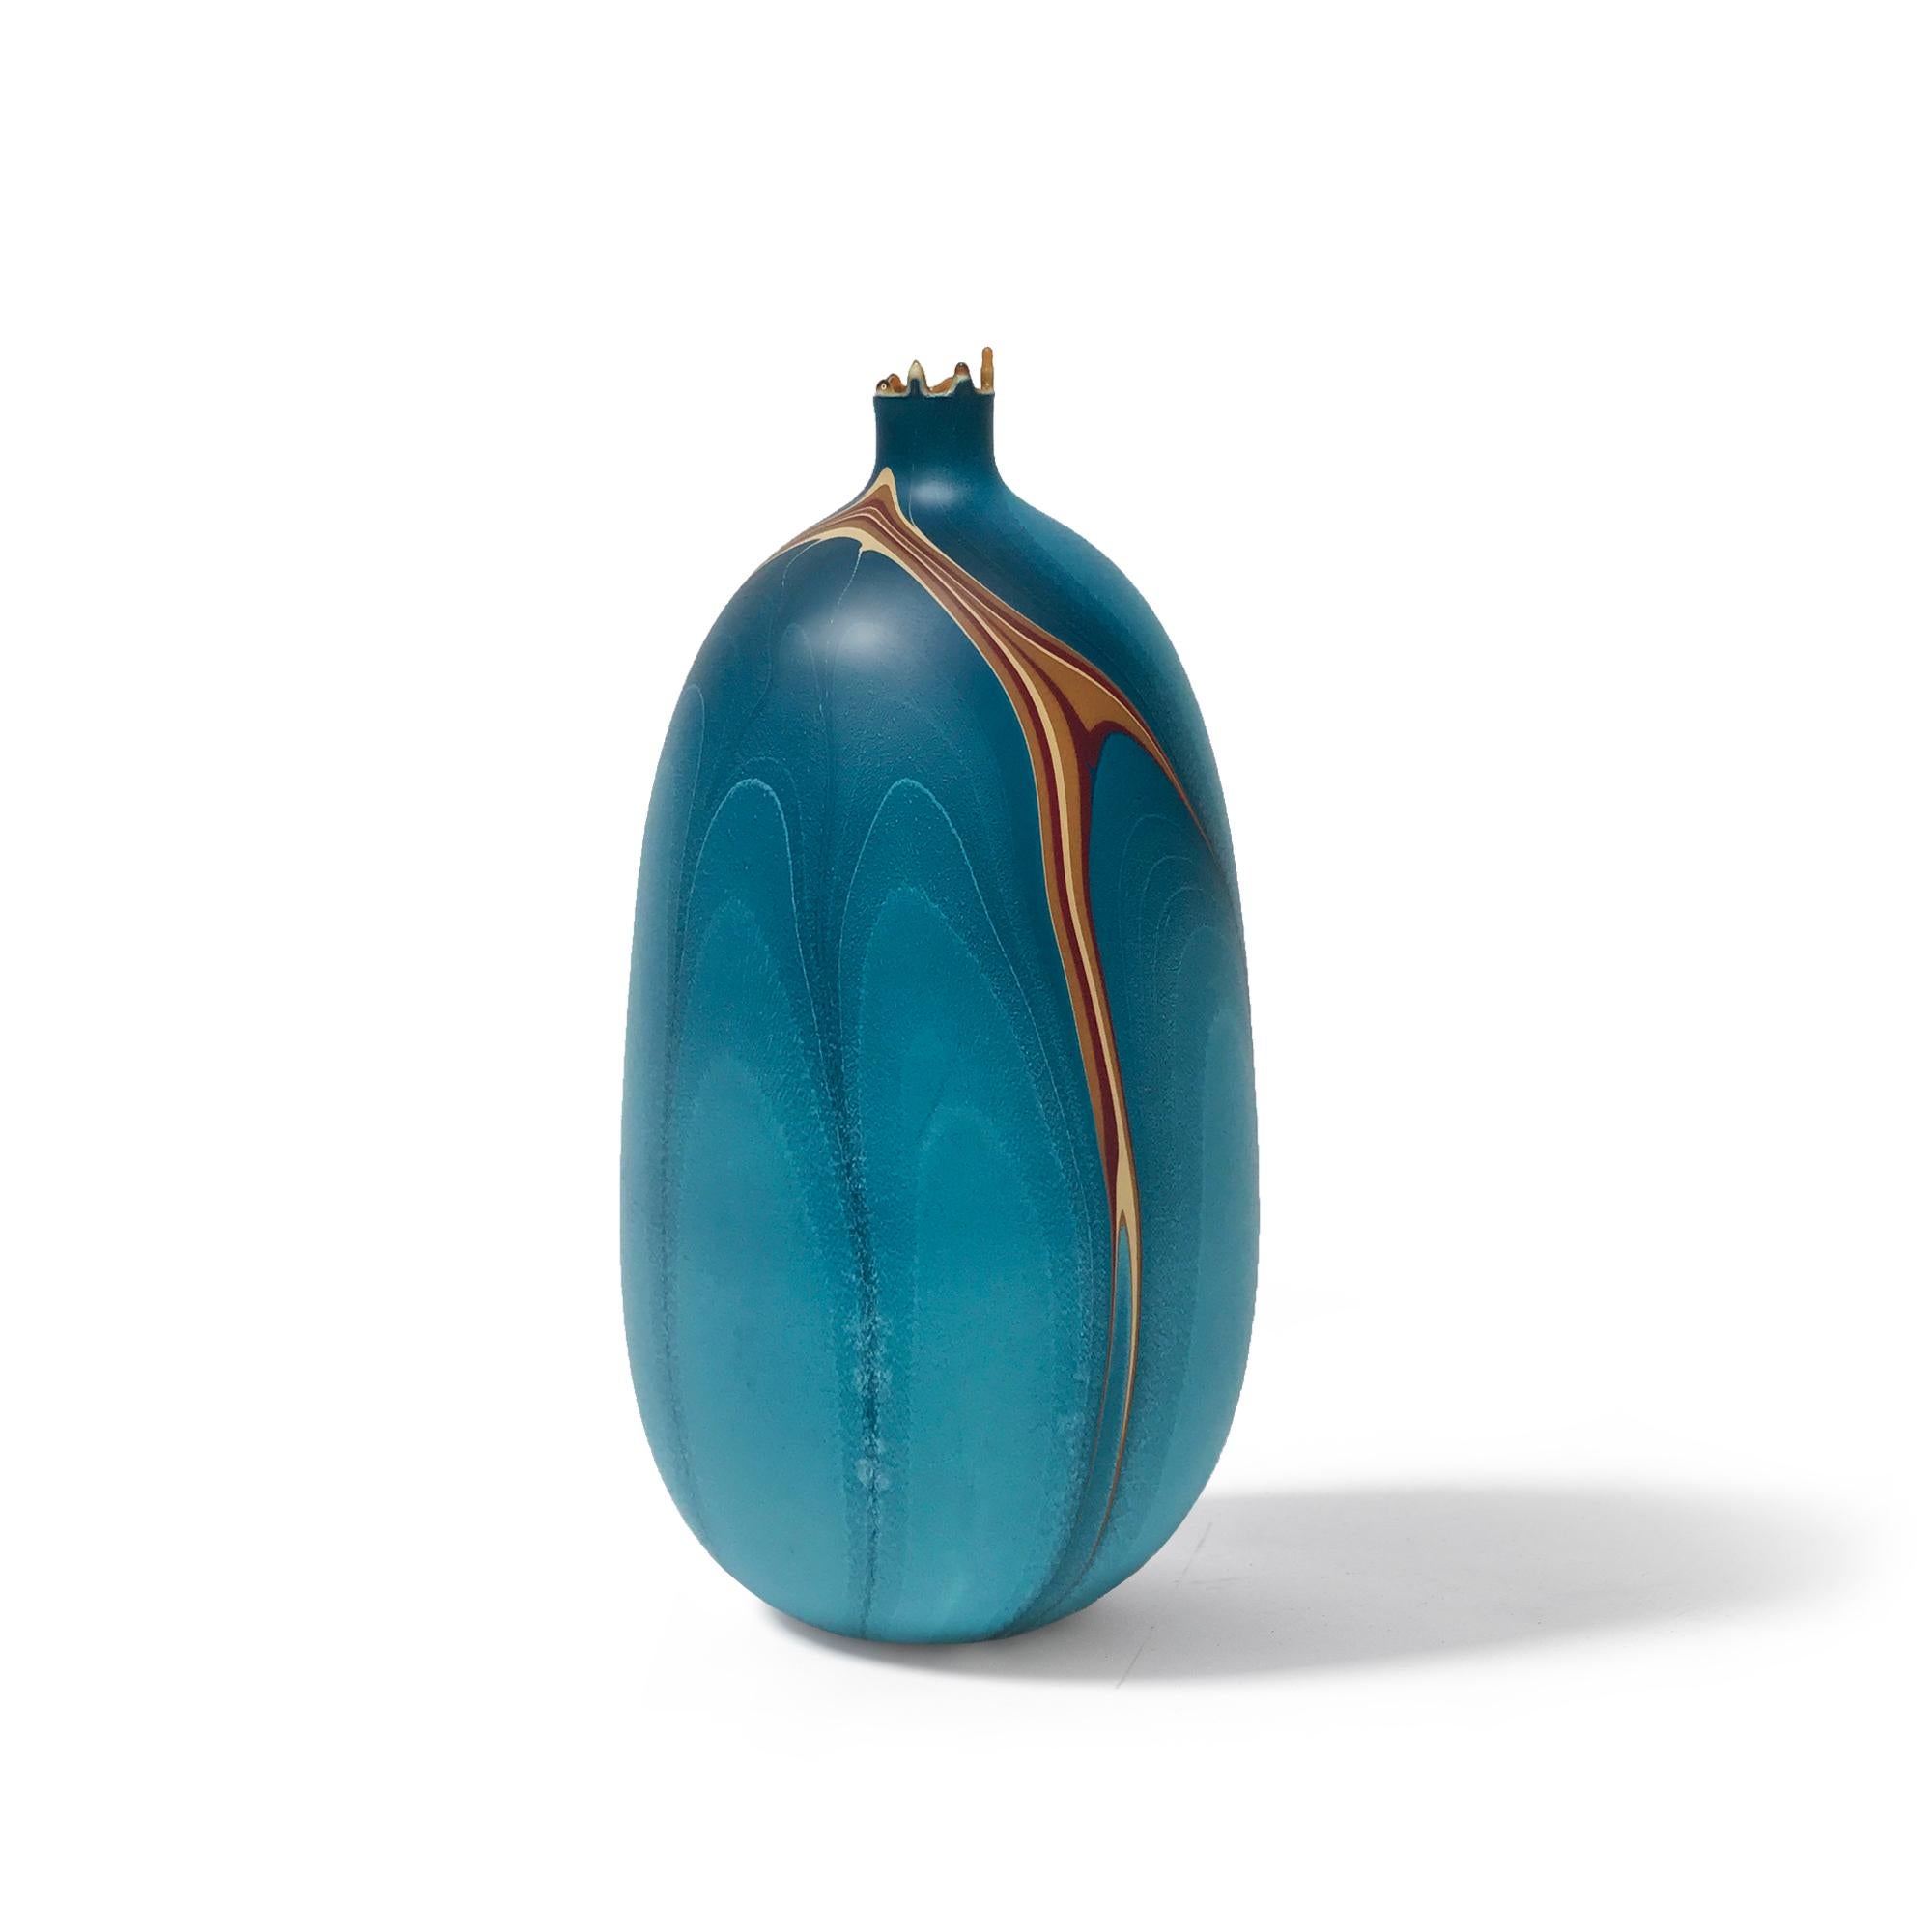 Nile Oblong Hydro vase by Elyse Graham
Dimensions: W 14 x D 14 x H 29 cm
Materials: plaster, resin
Molded, dyed, and finished by hand in LA. Customization.
Available.
All pieces are made to order.

Our new Hydro Vases take on a futuristic